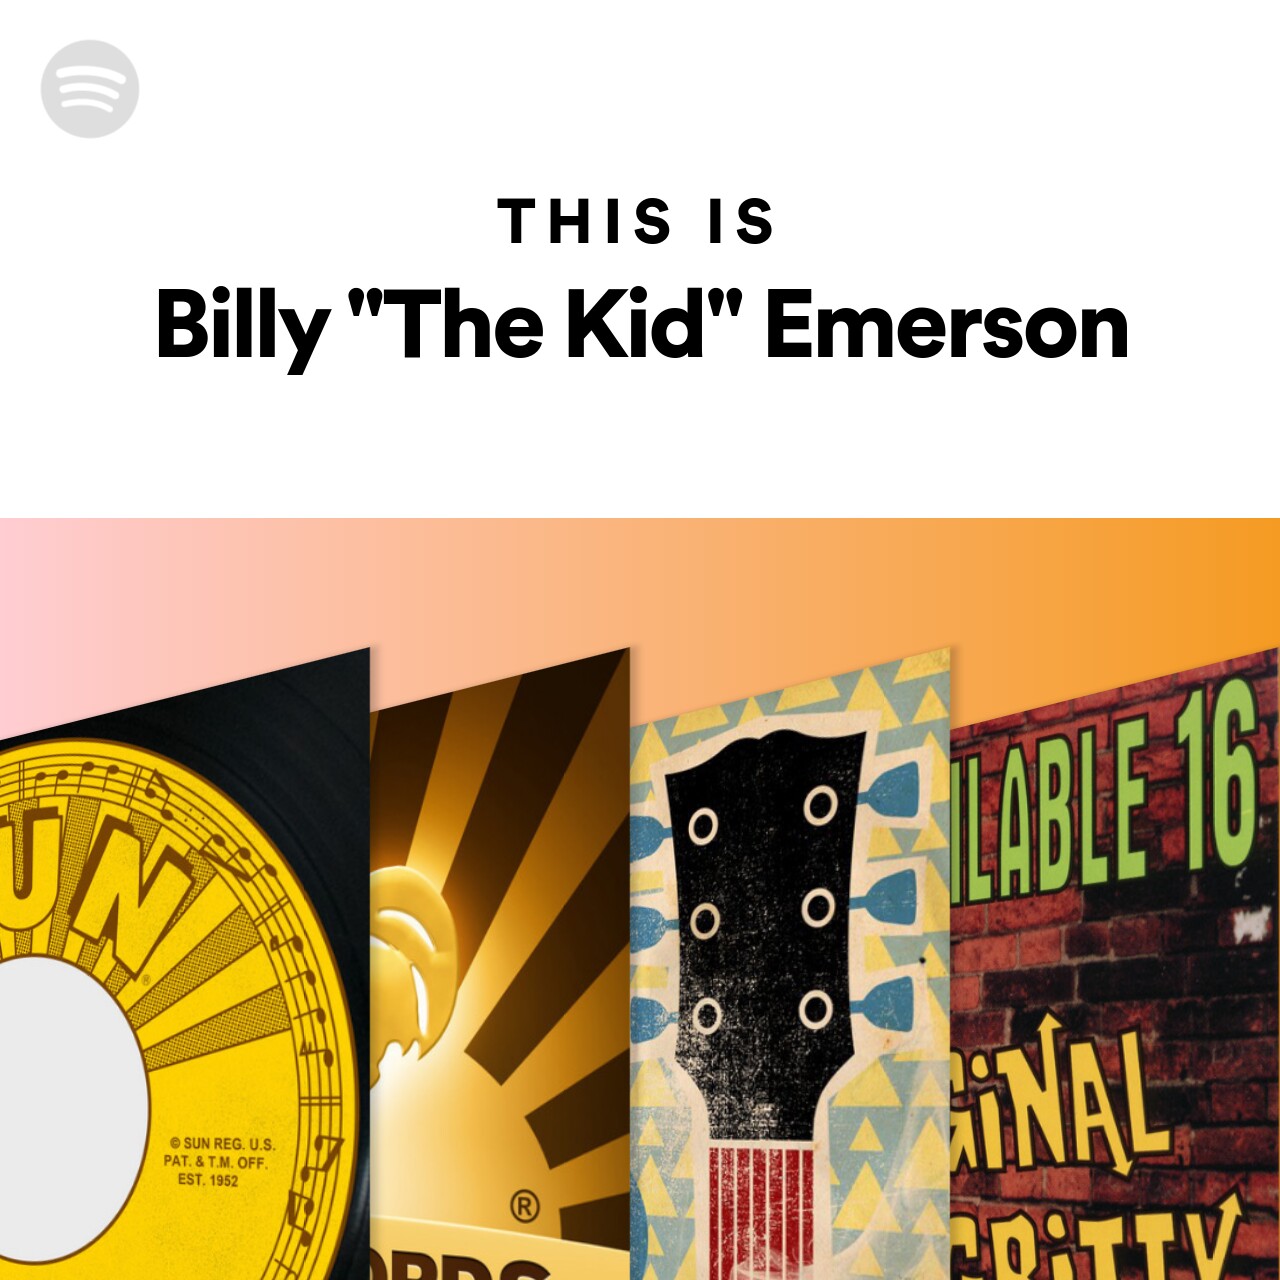 This Is Billy "The Kid" Emerson